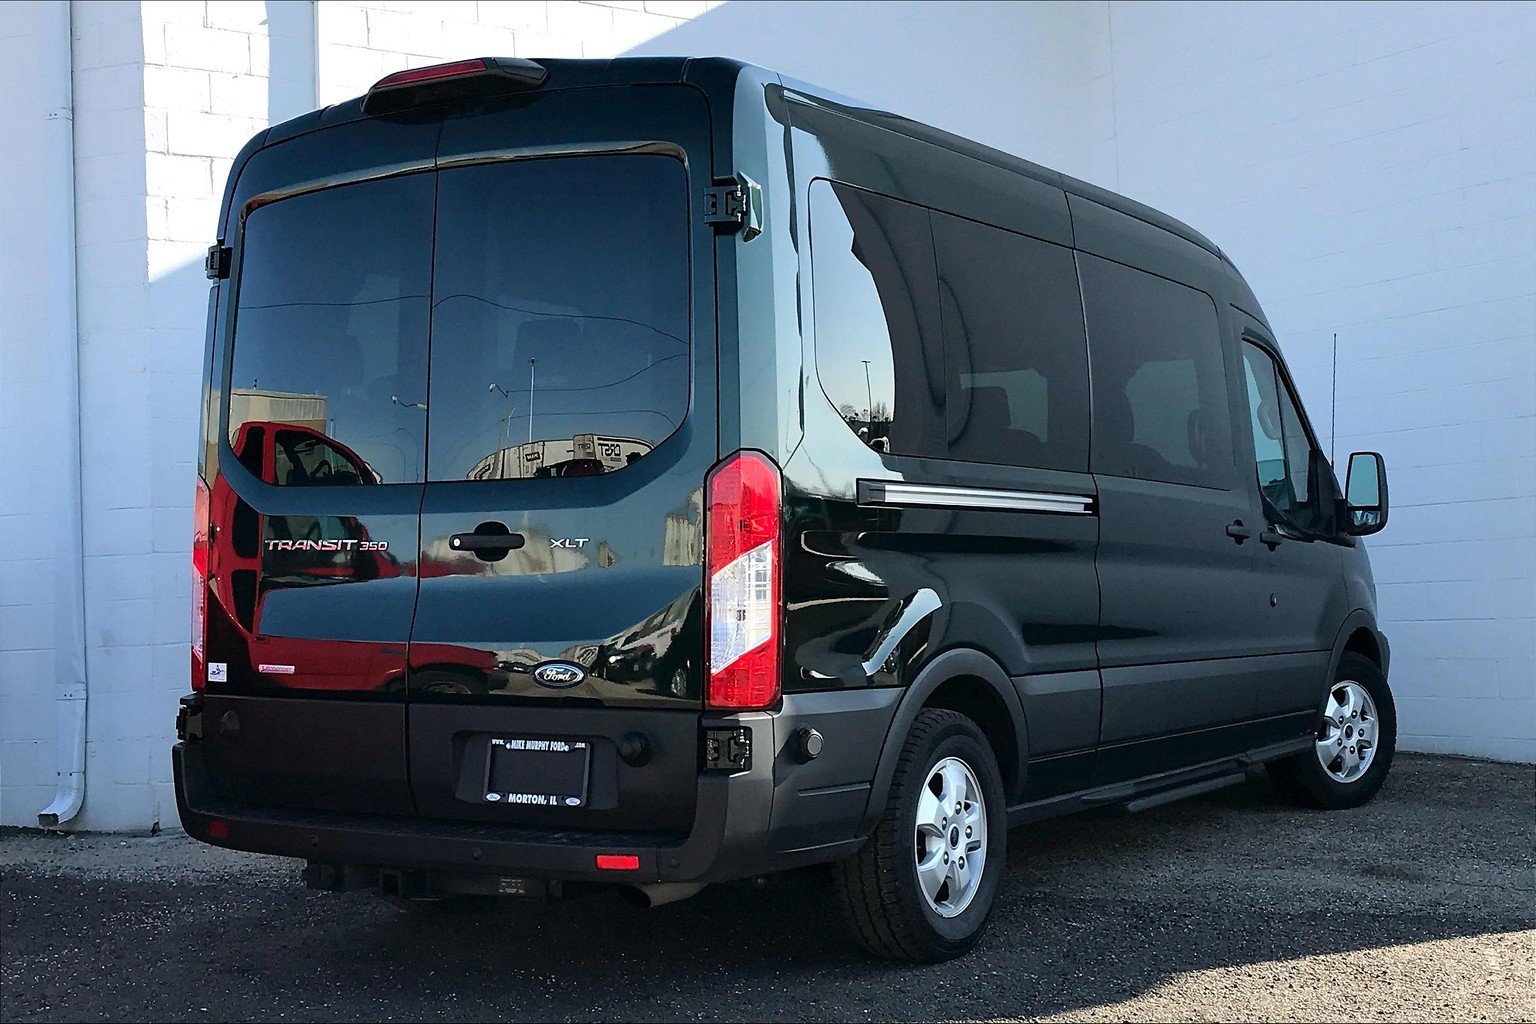 used ford transit van 15 passengers for sale